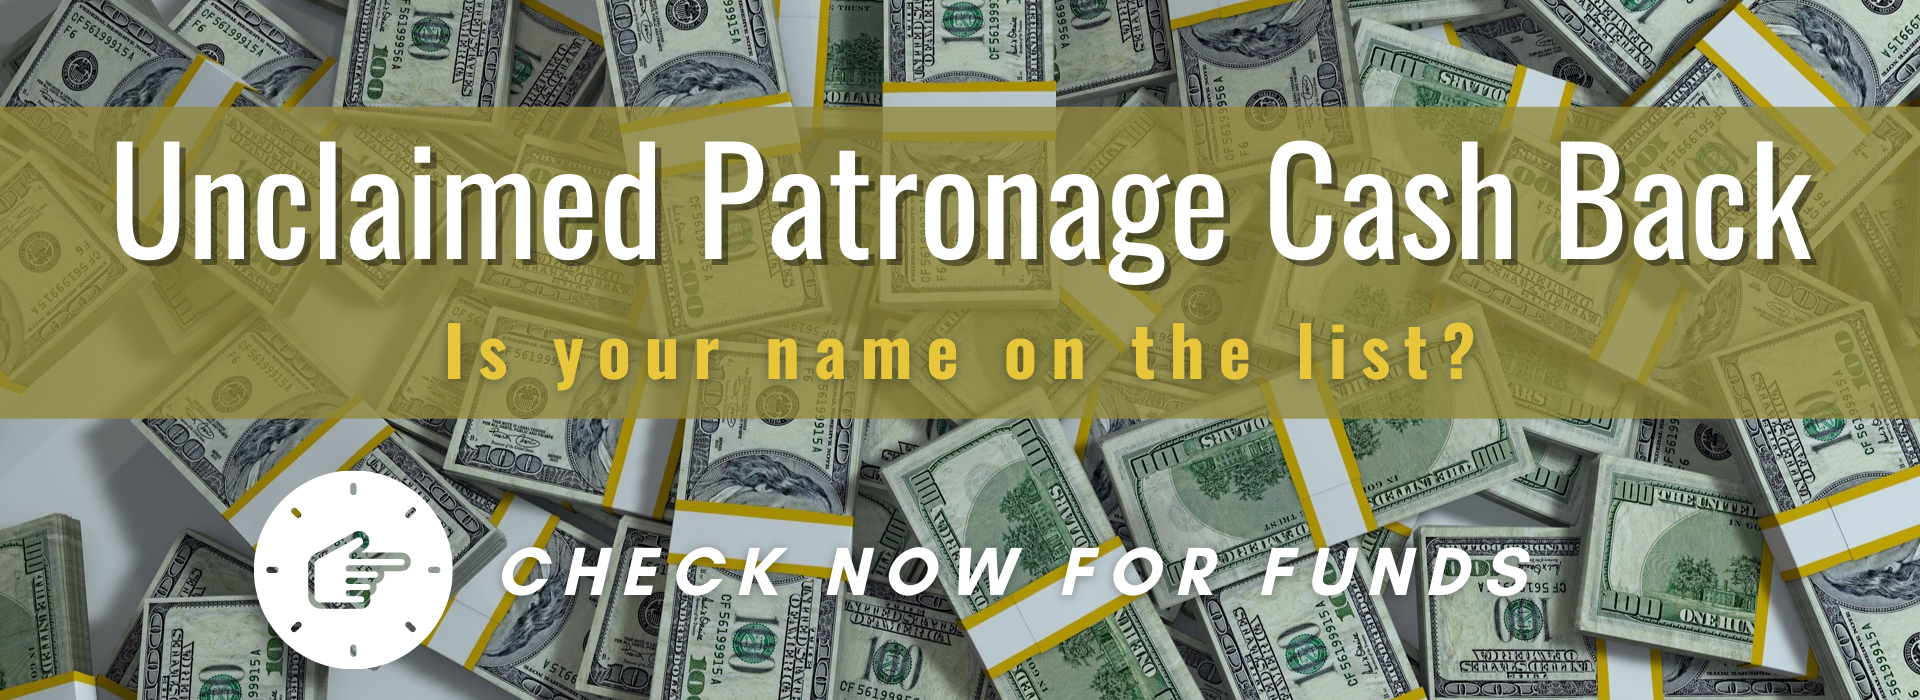 Check to see if you have unclaimed patronage cash back